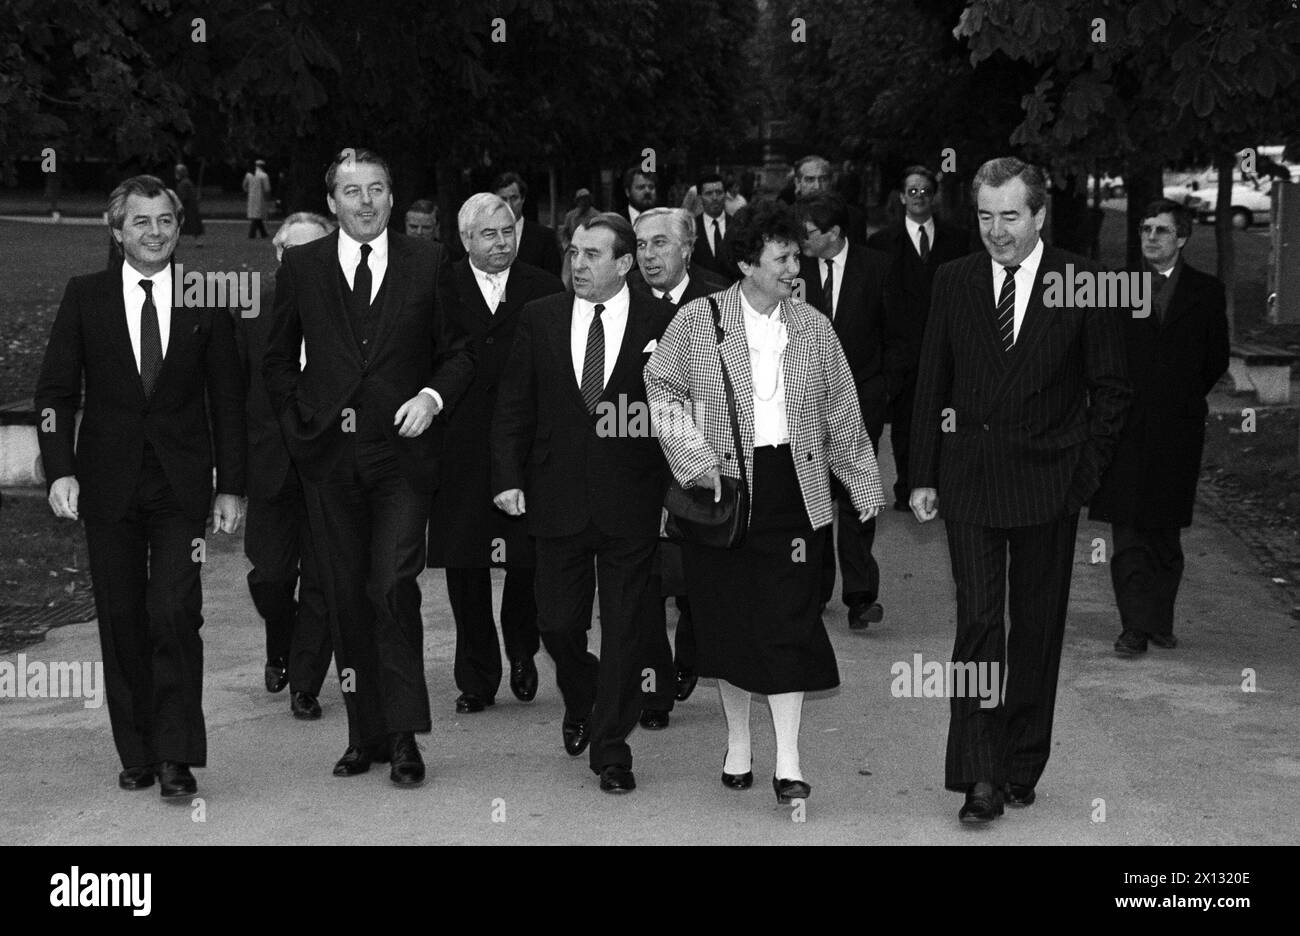 The photo was taken on October 26th 1987 on the occasion of Austria's national holiday and shows members of the Austrian government on their way to the traditional donation of a wreath on the Heldenplatz in Vienna. F.l.t.r.: Minister of Agriculture Josef Riegler, Chancellor Franz Vranitzky, Minister of Economy Robert Graf, Minister of Defence Robert Lichal, Social Minister Alfred Dallinger, Minister of Education Hilde Hawlicek and Vice Chancellor Alois Mock. - 19871026 PD0010 - Rechteinfo: Rights Managed (RM) Stock Photo